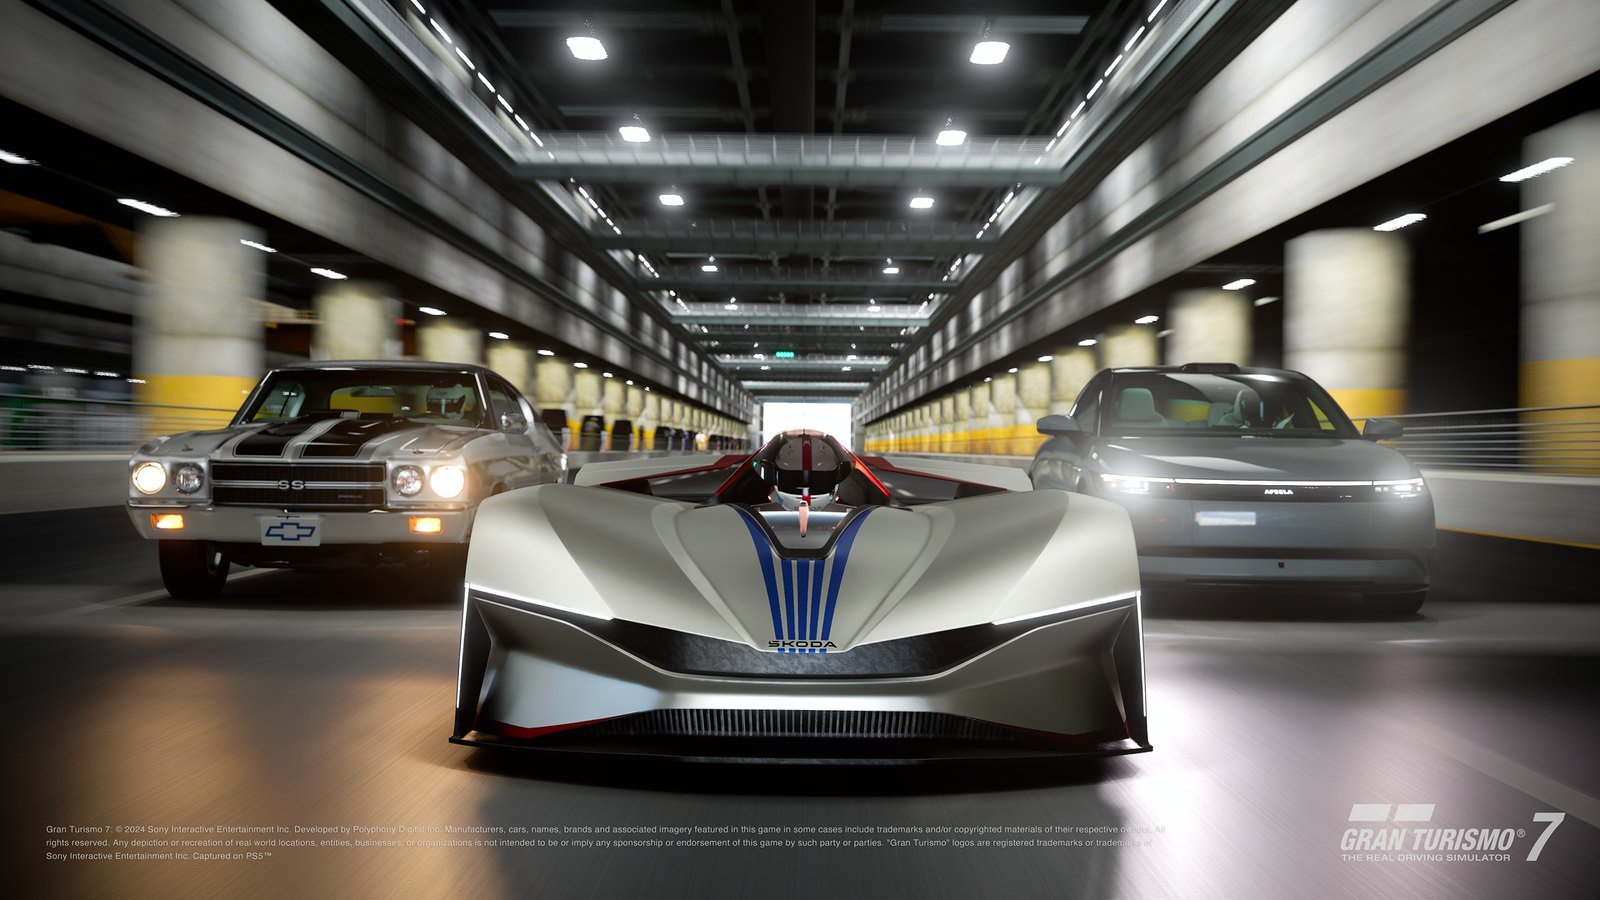 Gran Turismo 7 is updated by exclusively introducing… an electric car!